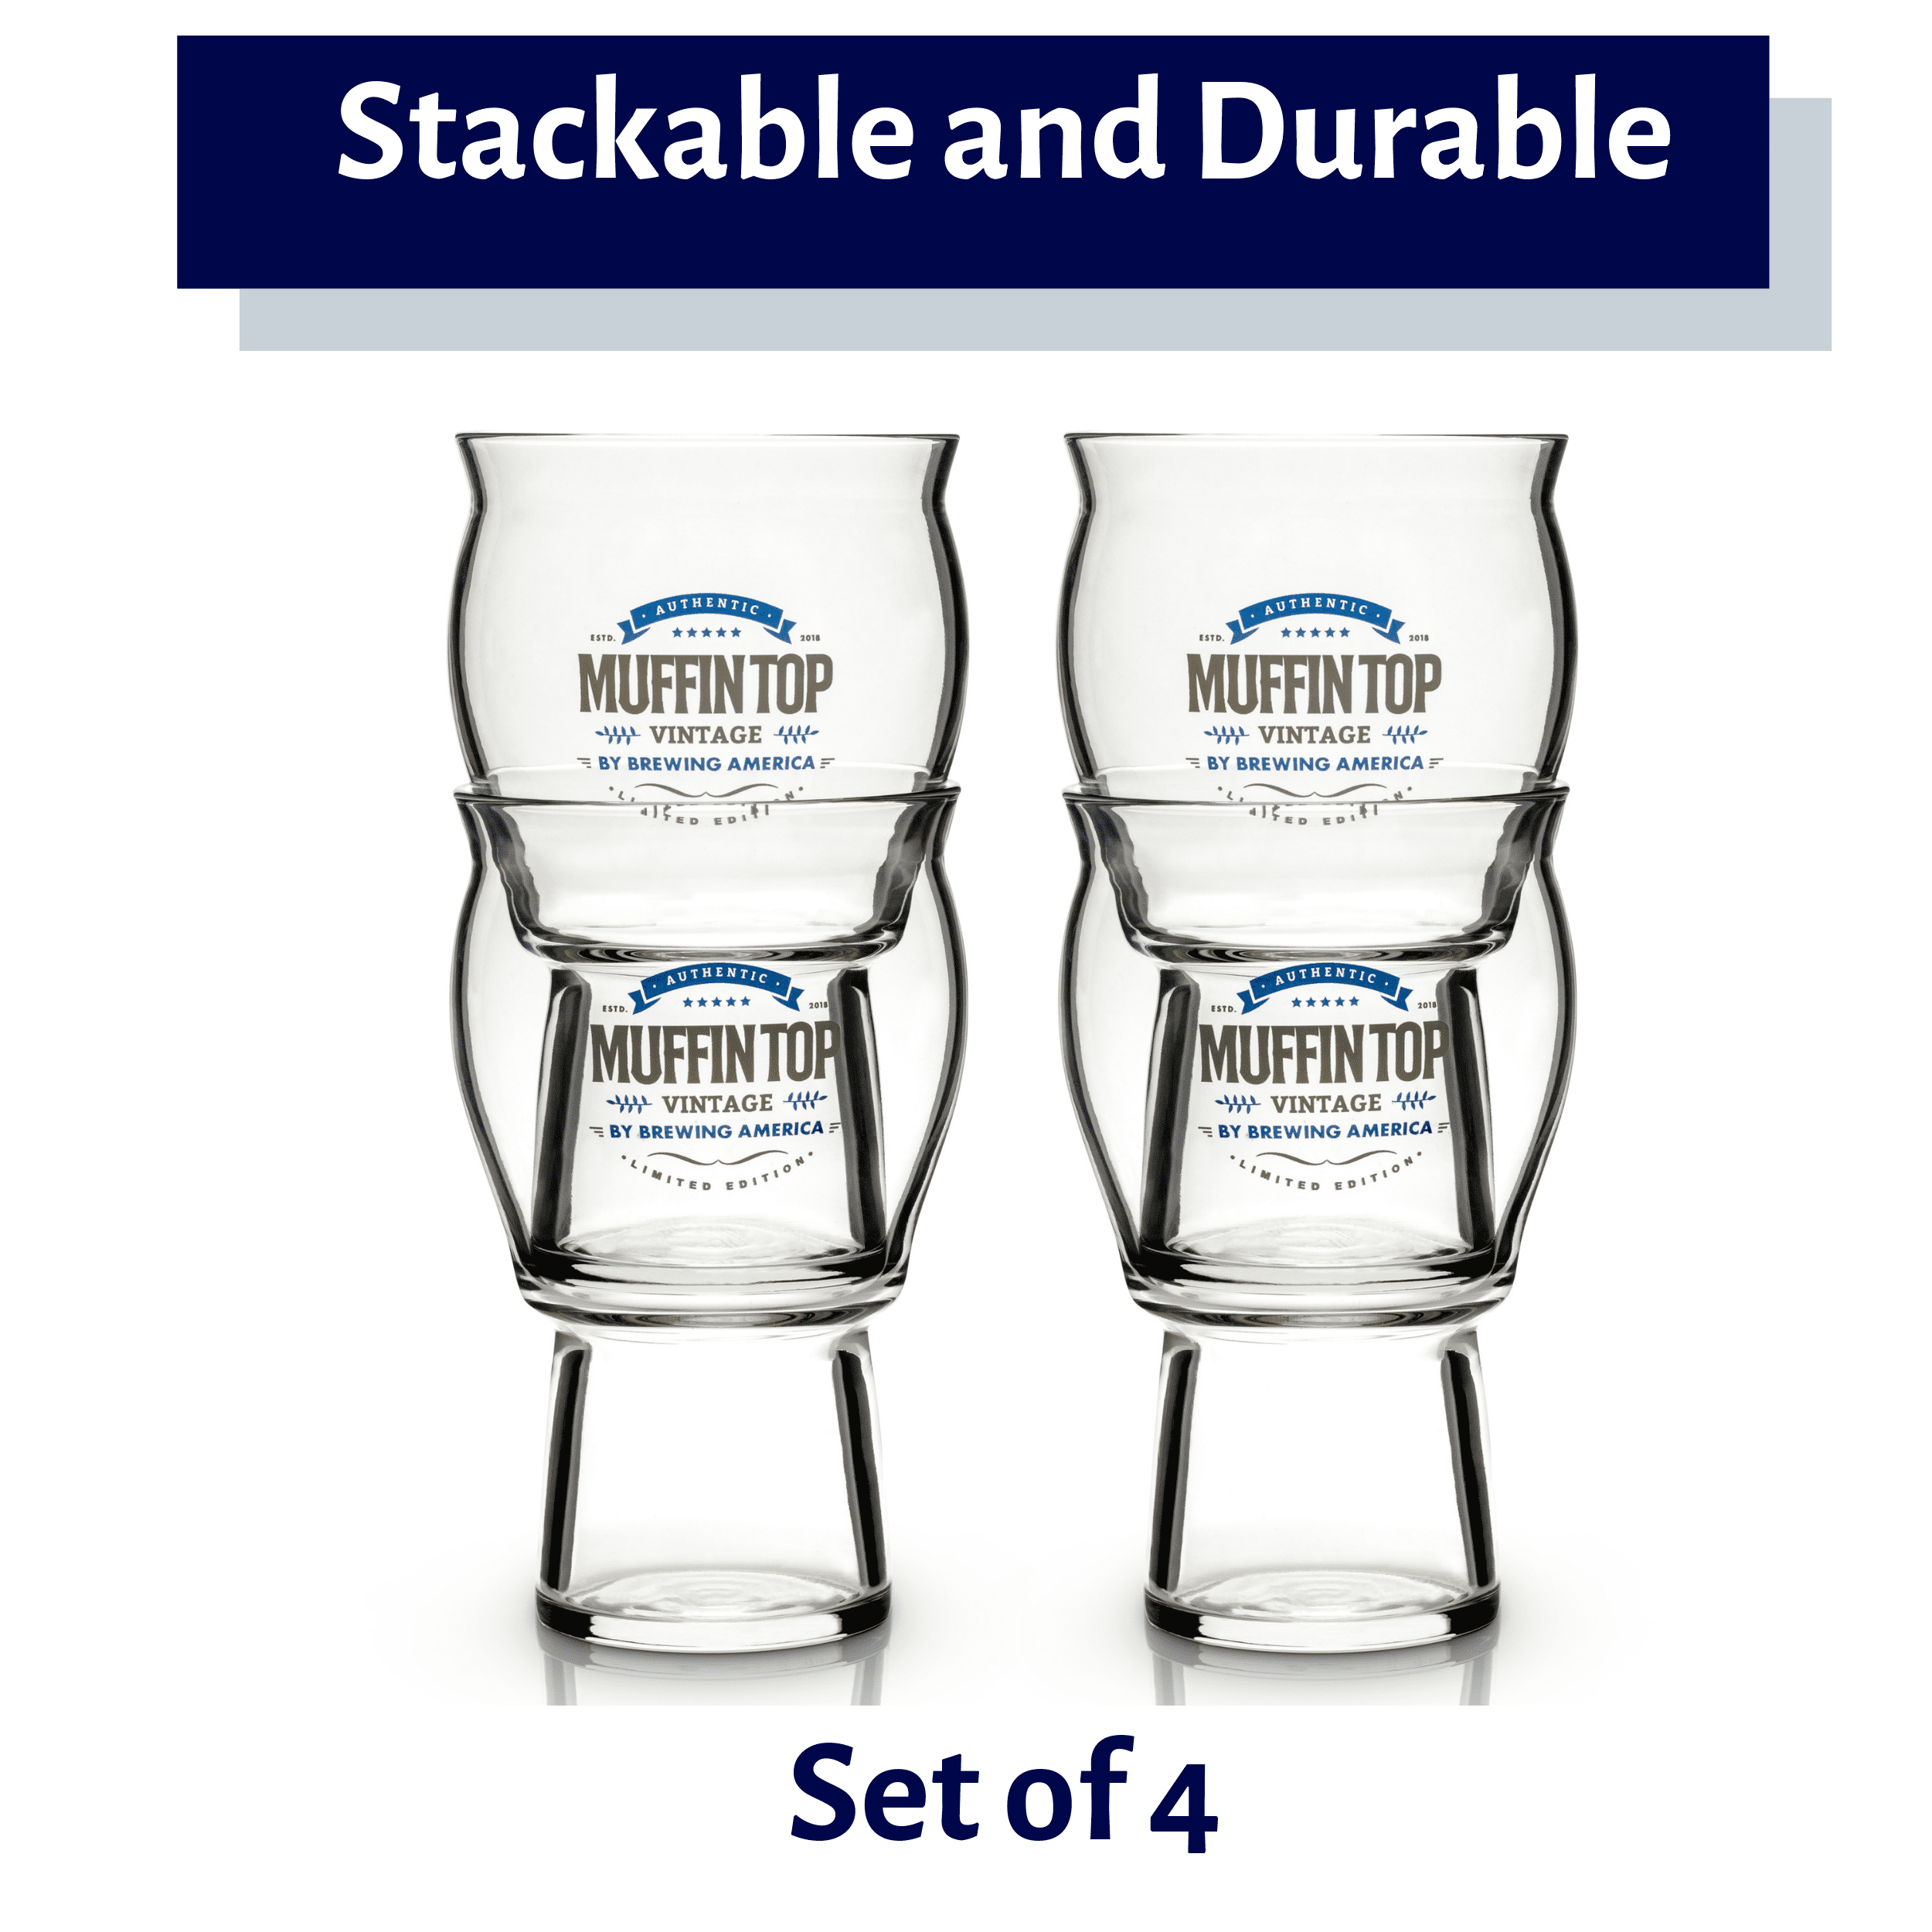 Brewing America Muffin Top Nucleated Beer Glasses - Cider, Soda, Tea - Muffin Top Clear 4 Pack, Size: One Size